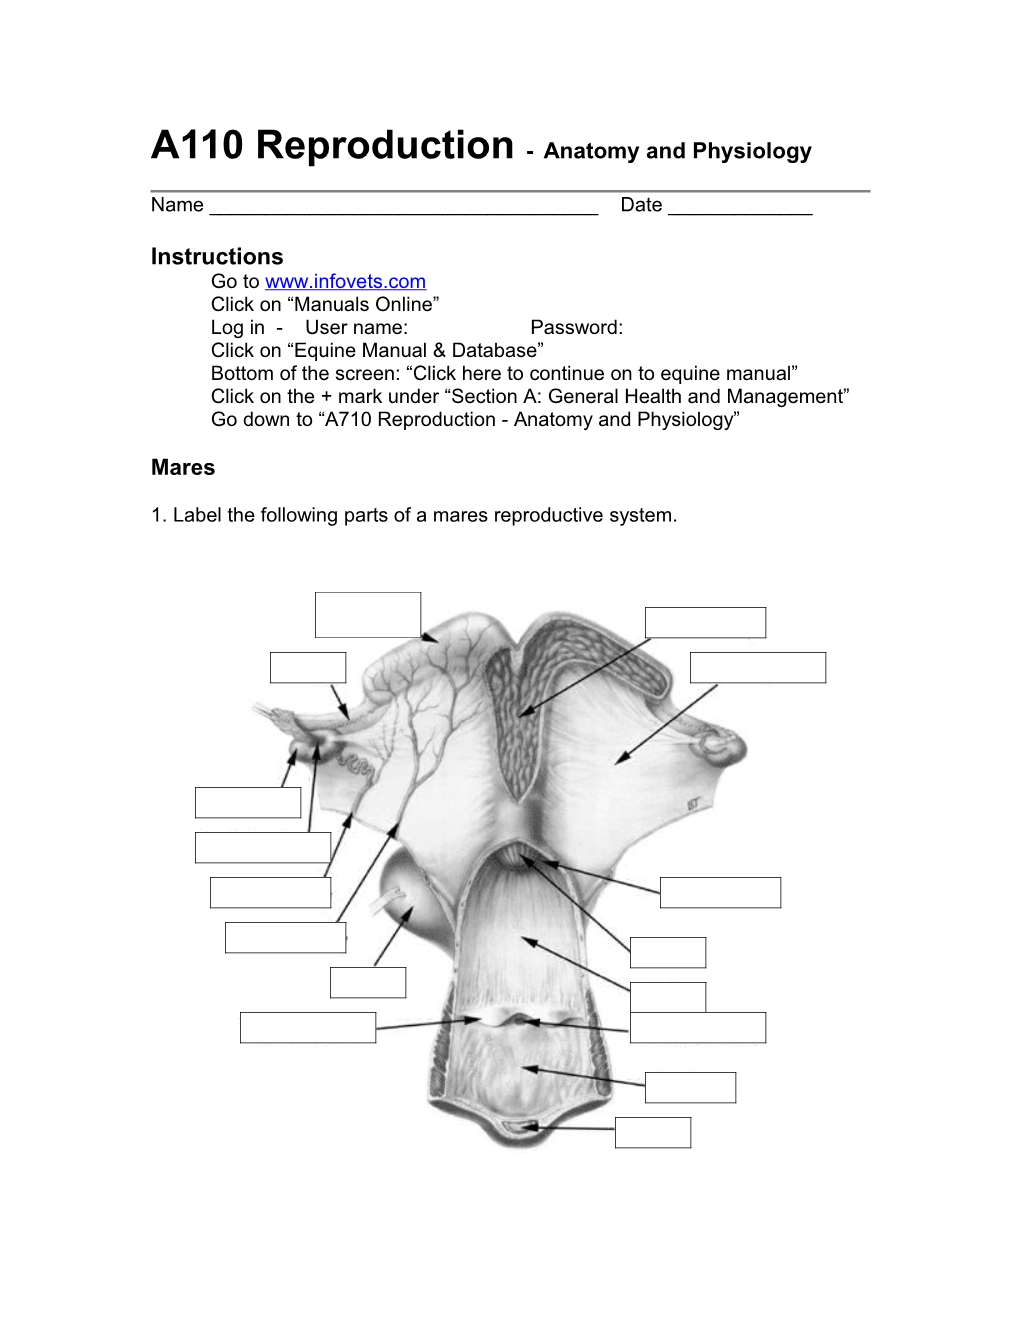 A110 Reproduction -Anatomy and Physiology